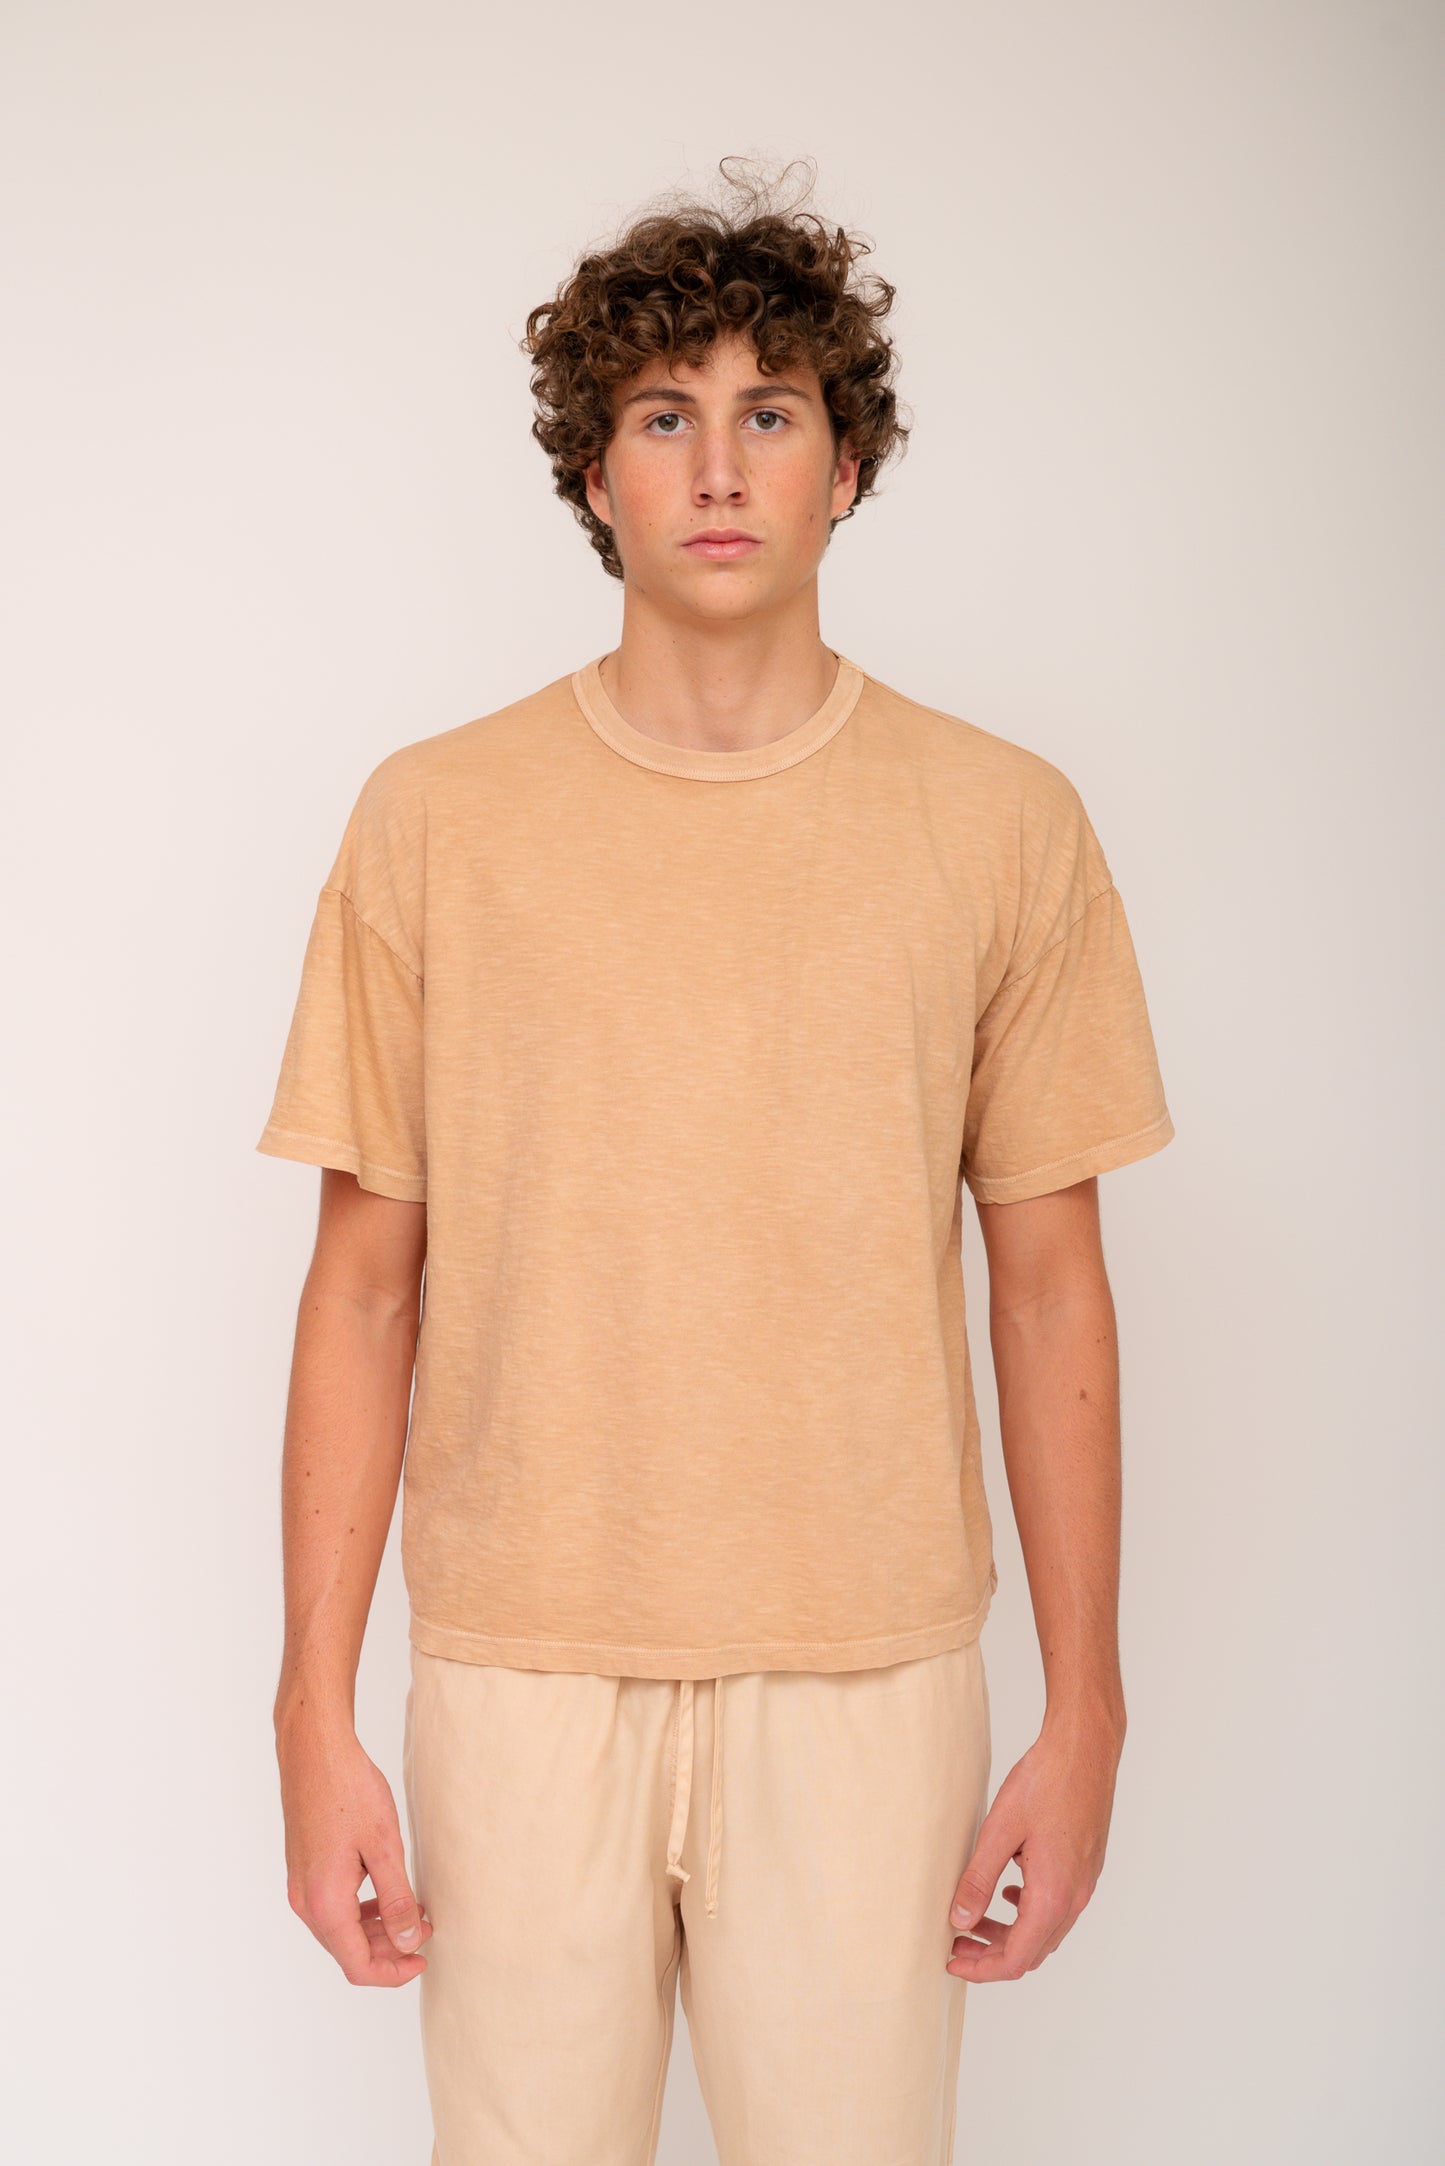 Cropped Journey Tee - Almond Peach